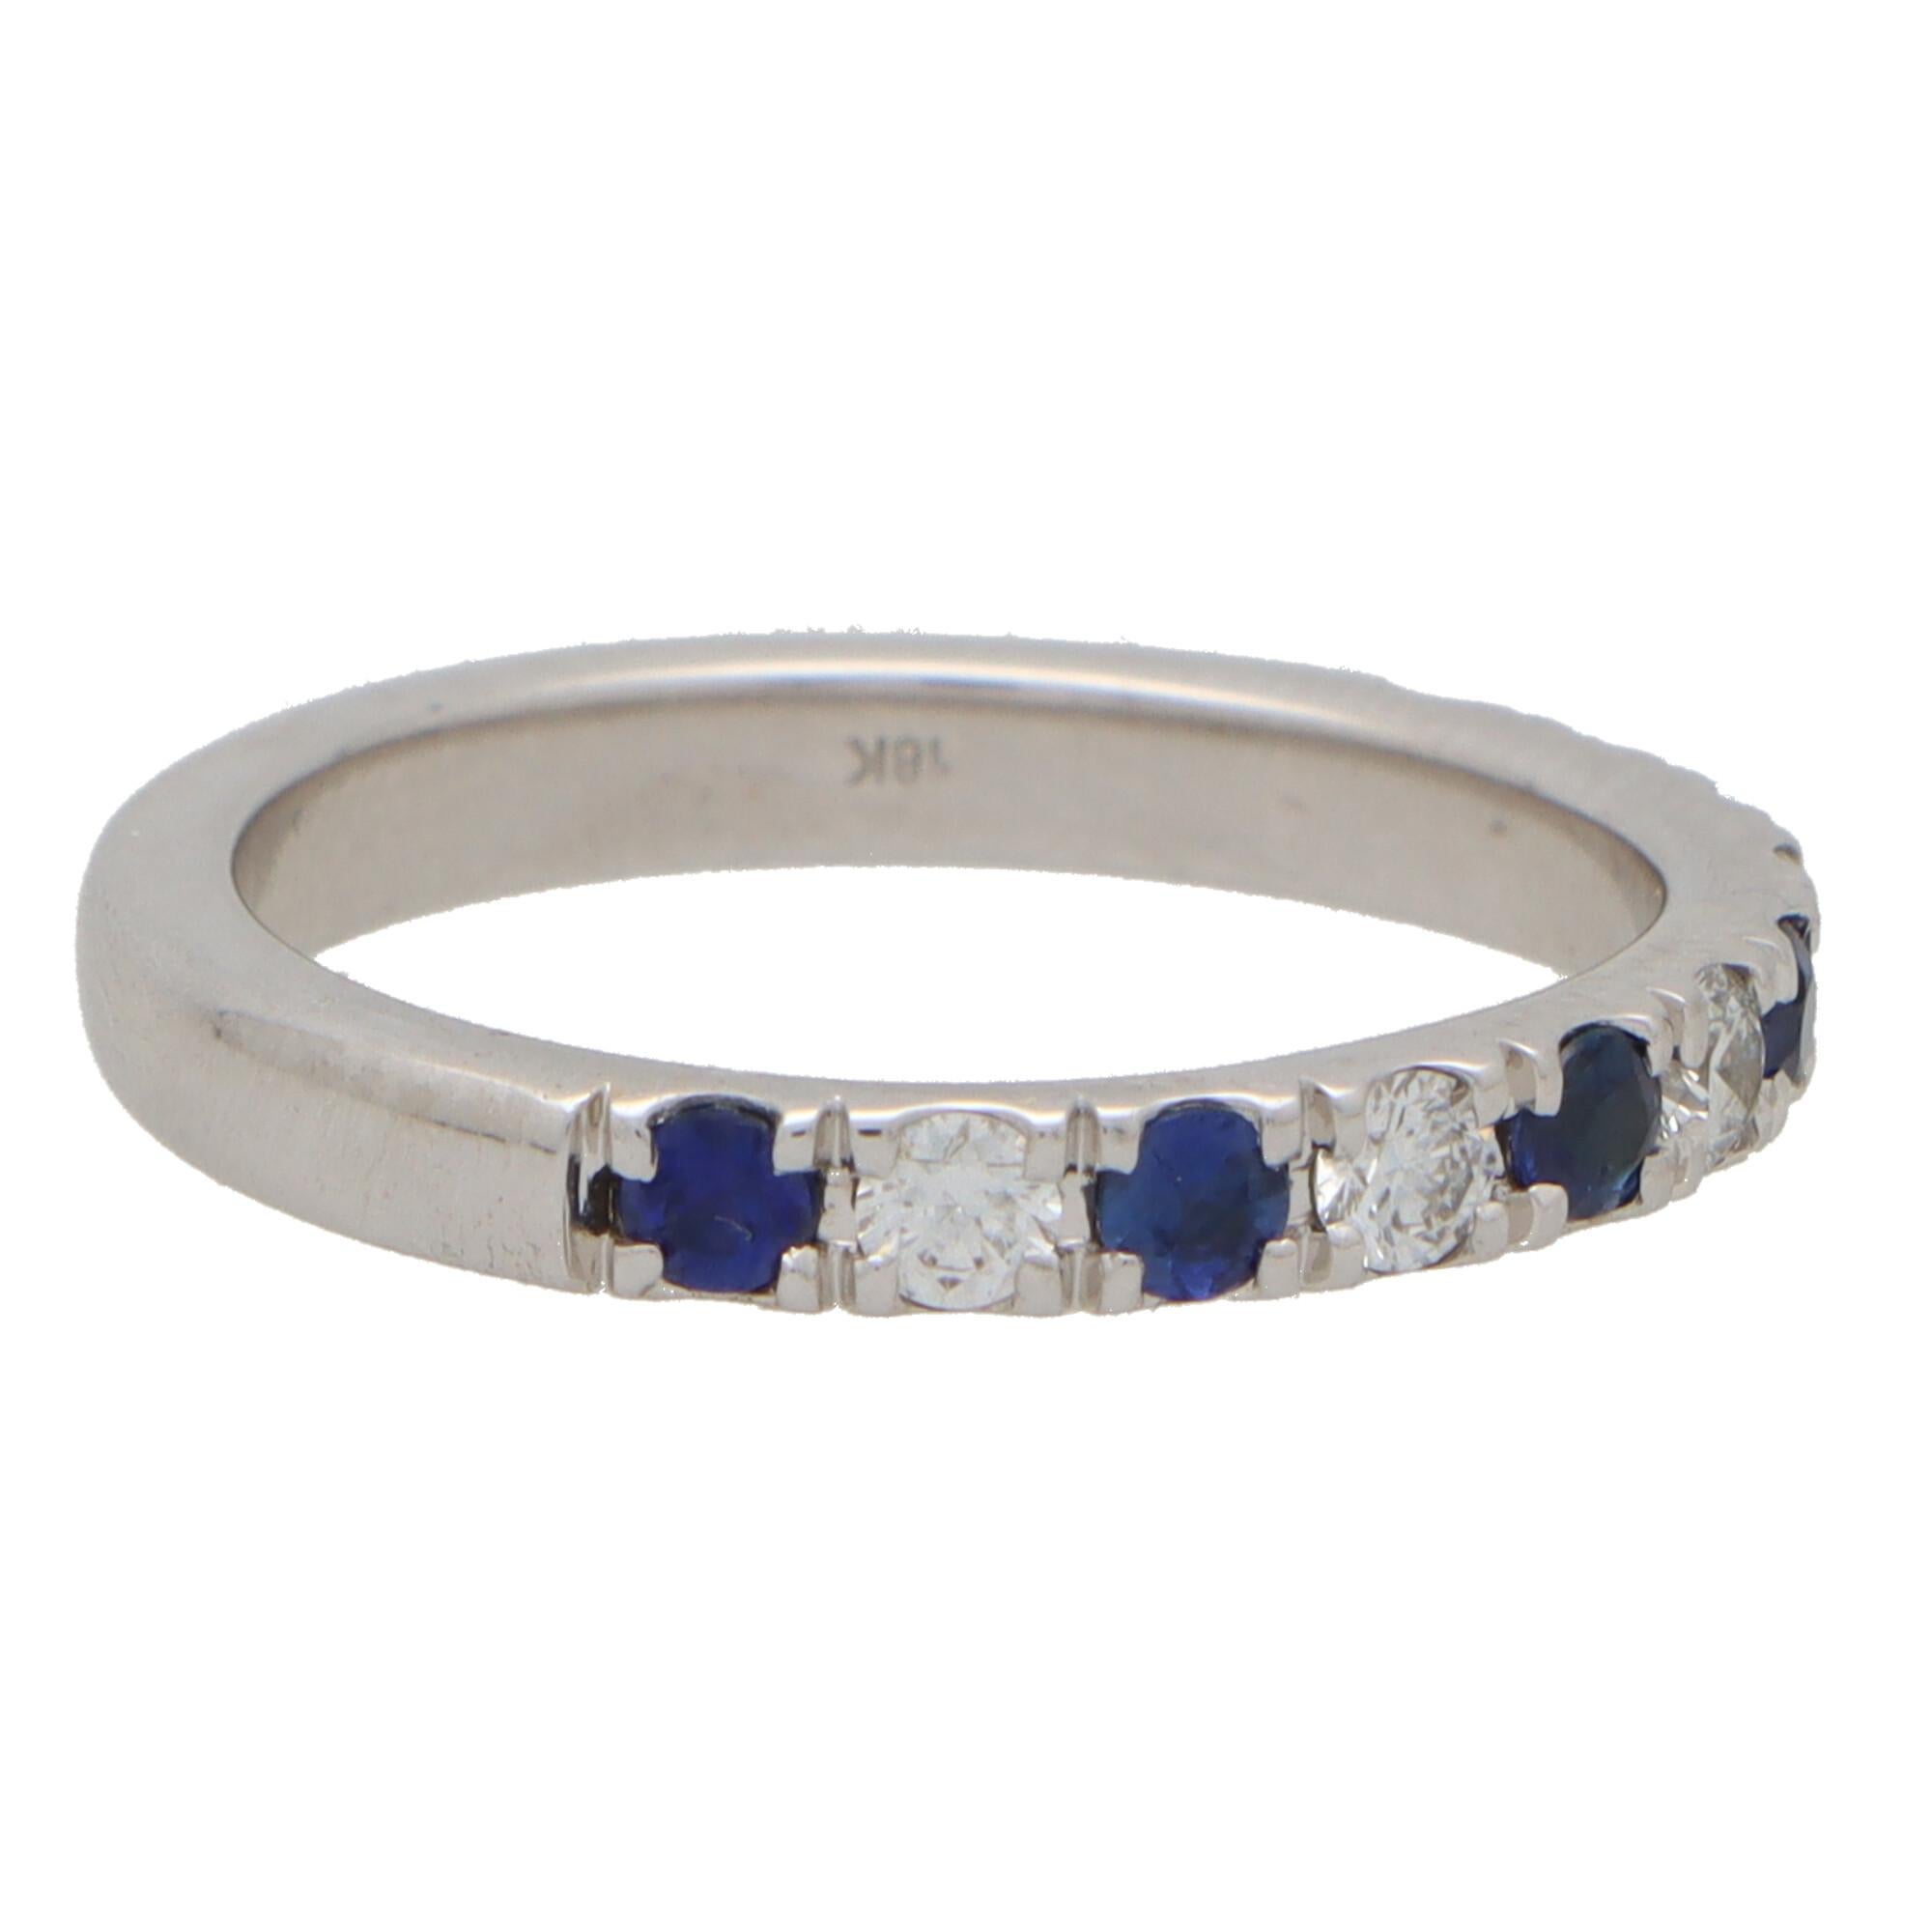 A stylish diamond and sapphire half eternity ring set in 18k white gold. 

The ring is composed of 11 round cut stones altogether, 6 of which being sapphires and 5 diamonds. All the stones are perfectly claw-set in white gold within a 3-millimetre